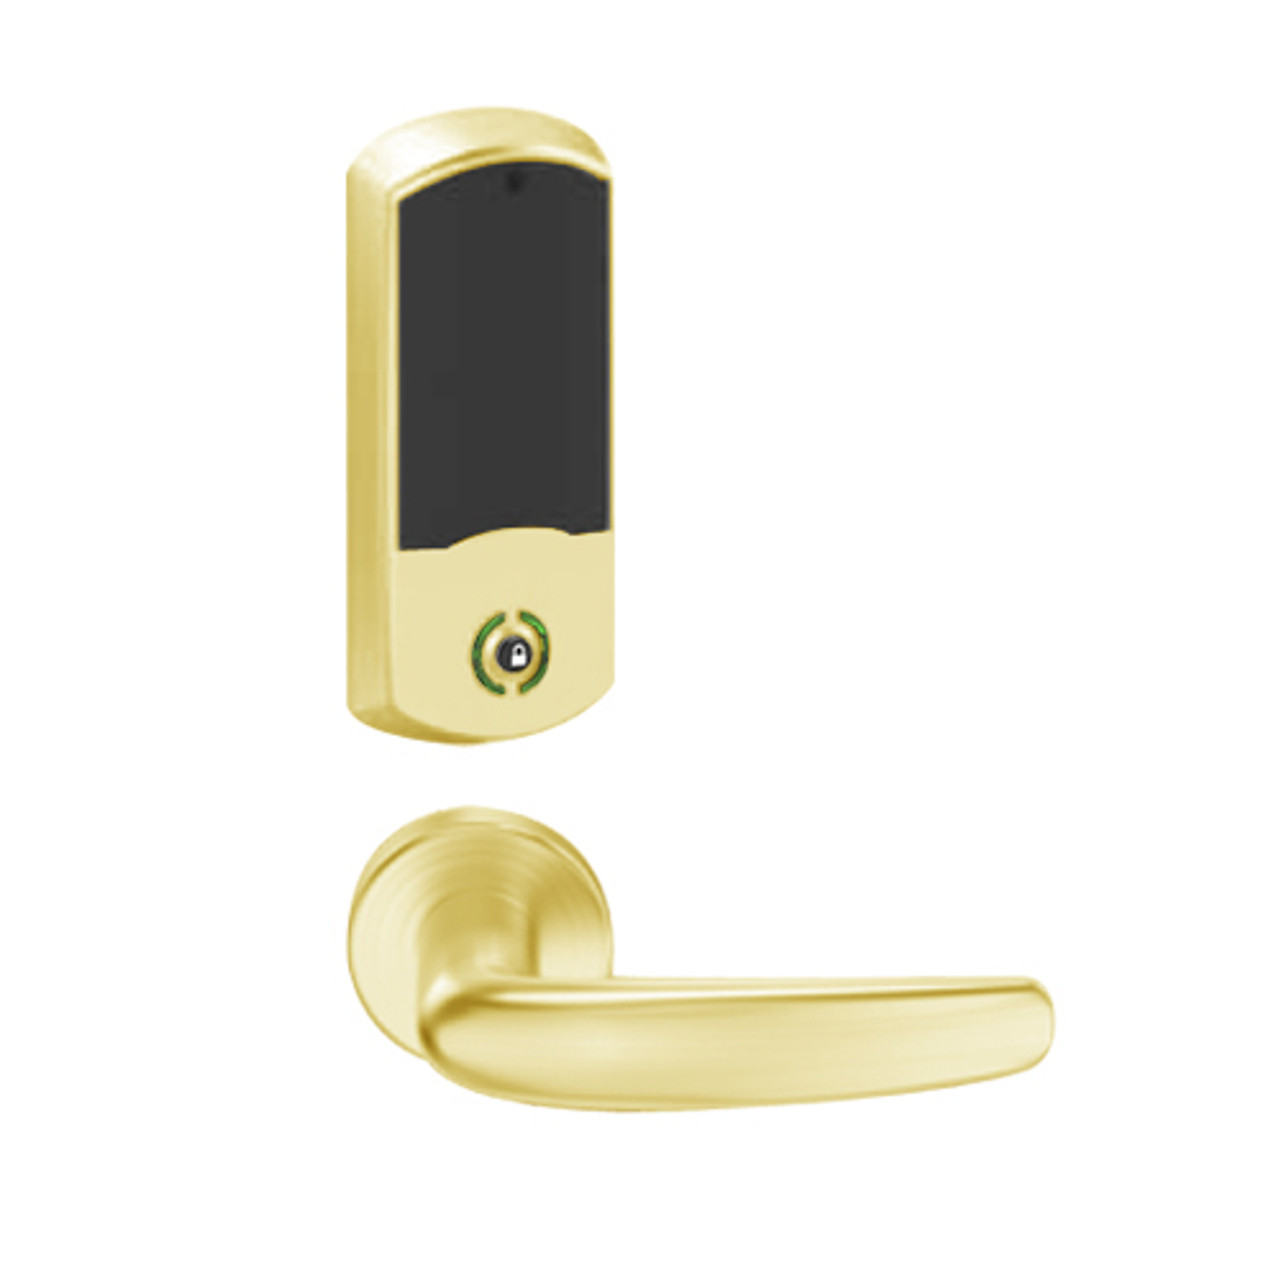 LEMB-GRW-BD-07-605-00C Schlage Privacy/Office Wireless Greenwich Mortise Lock with Push Button & LED Indicator and Athens Lever Prepped for SFIC in Bright Brass